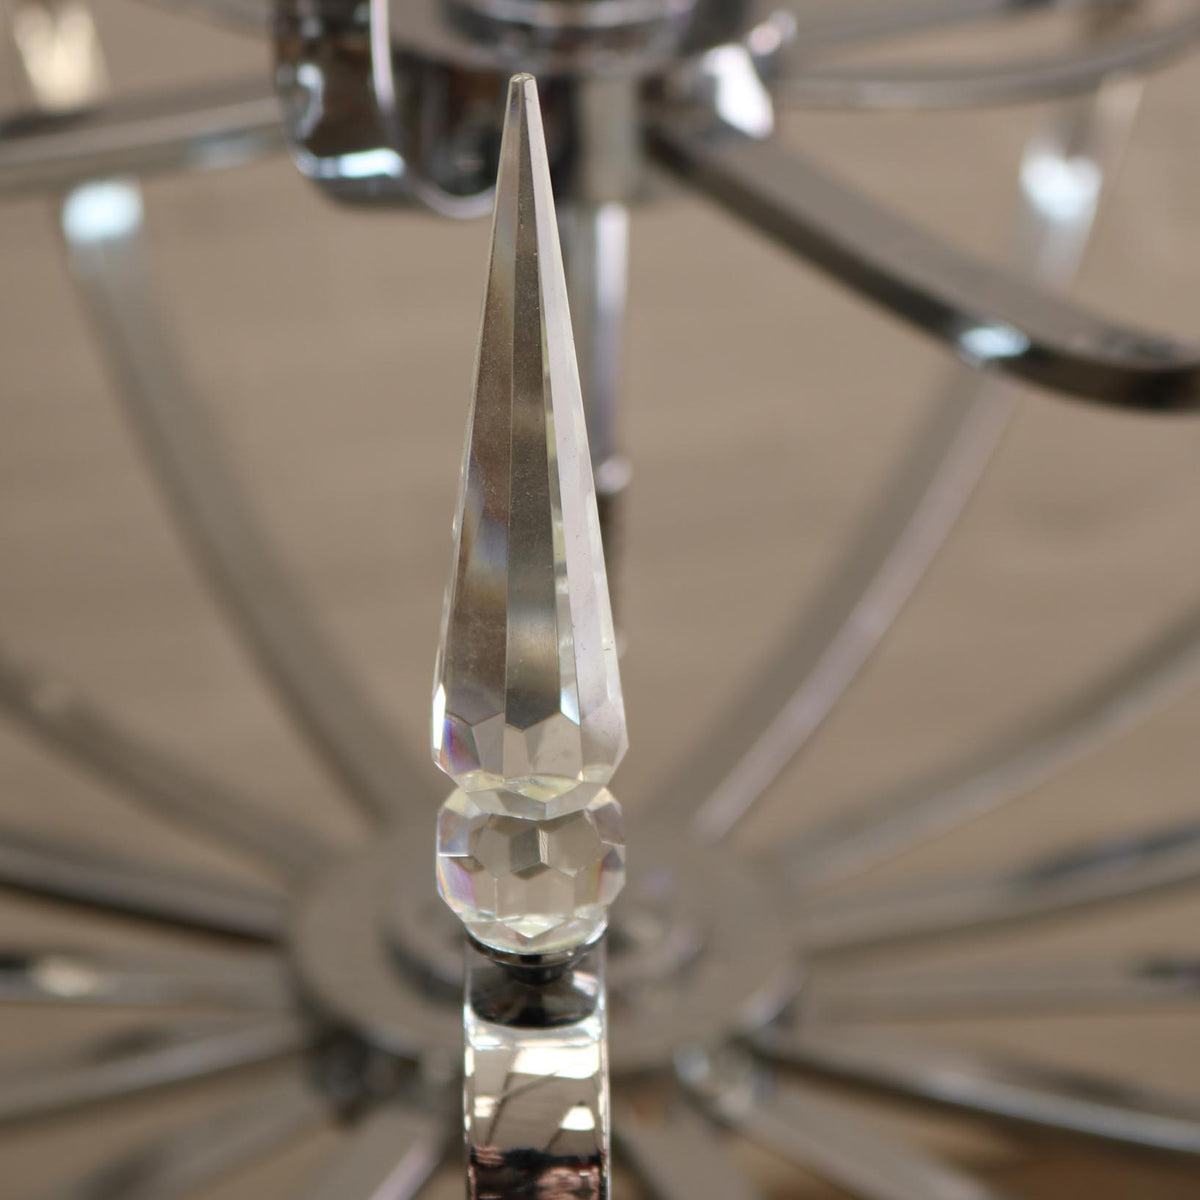 Chrome and Cut Glass Chandelier | The Architectural Forum